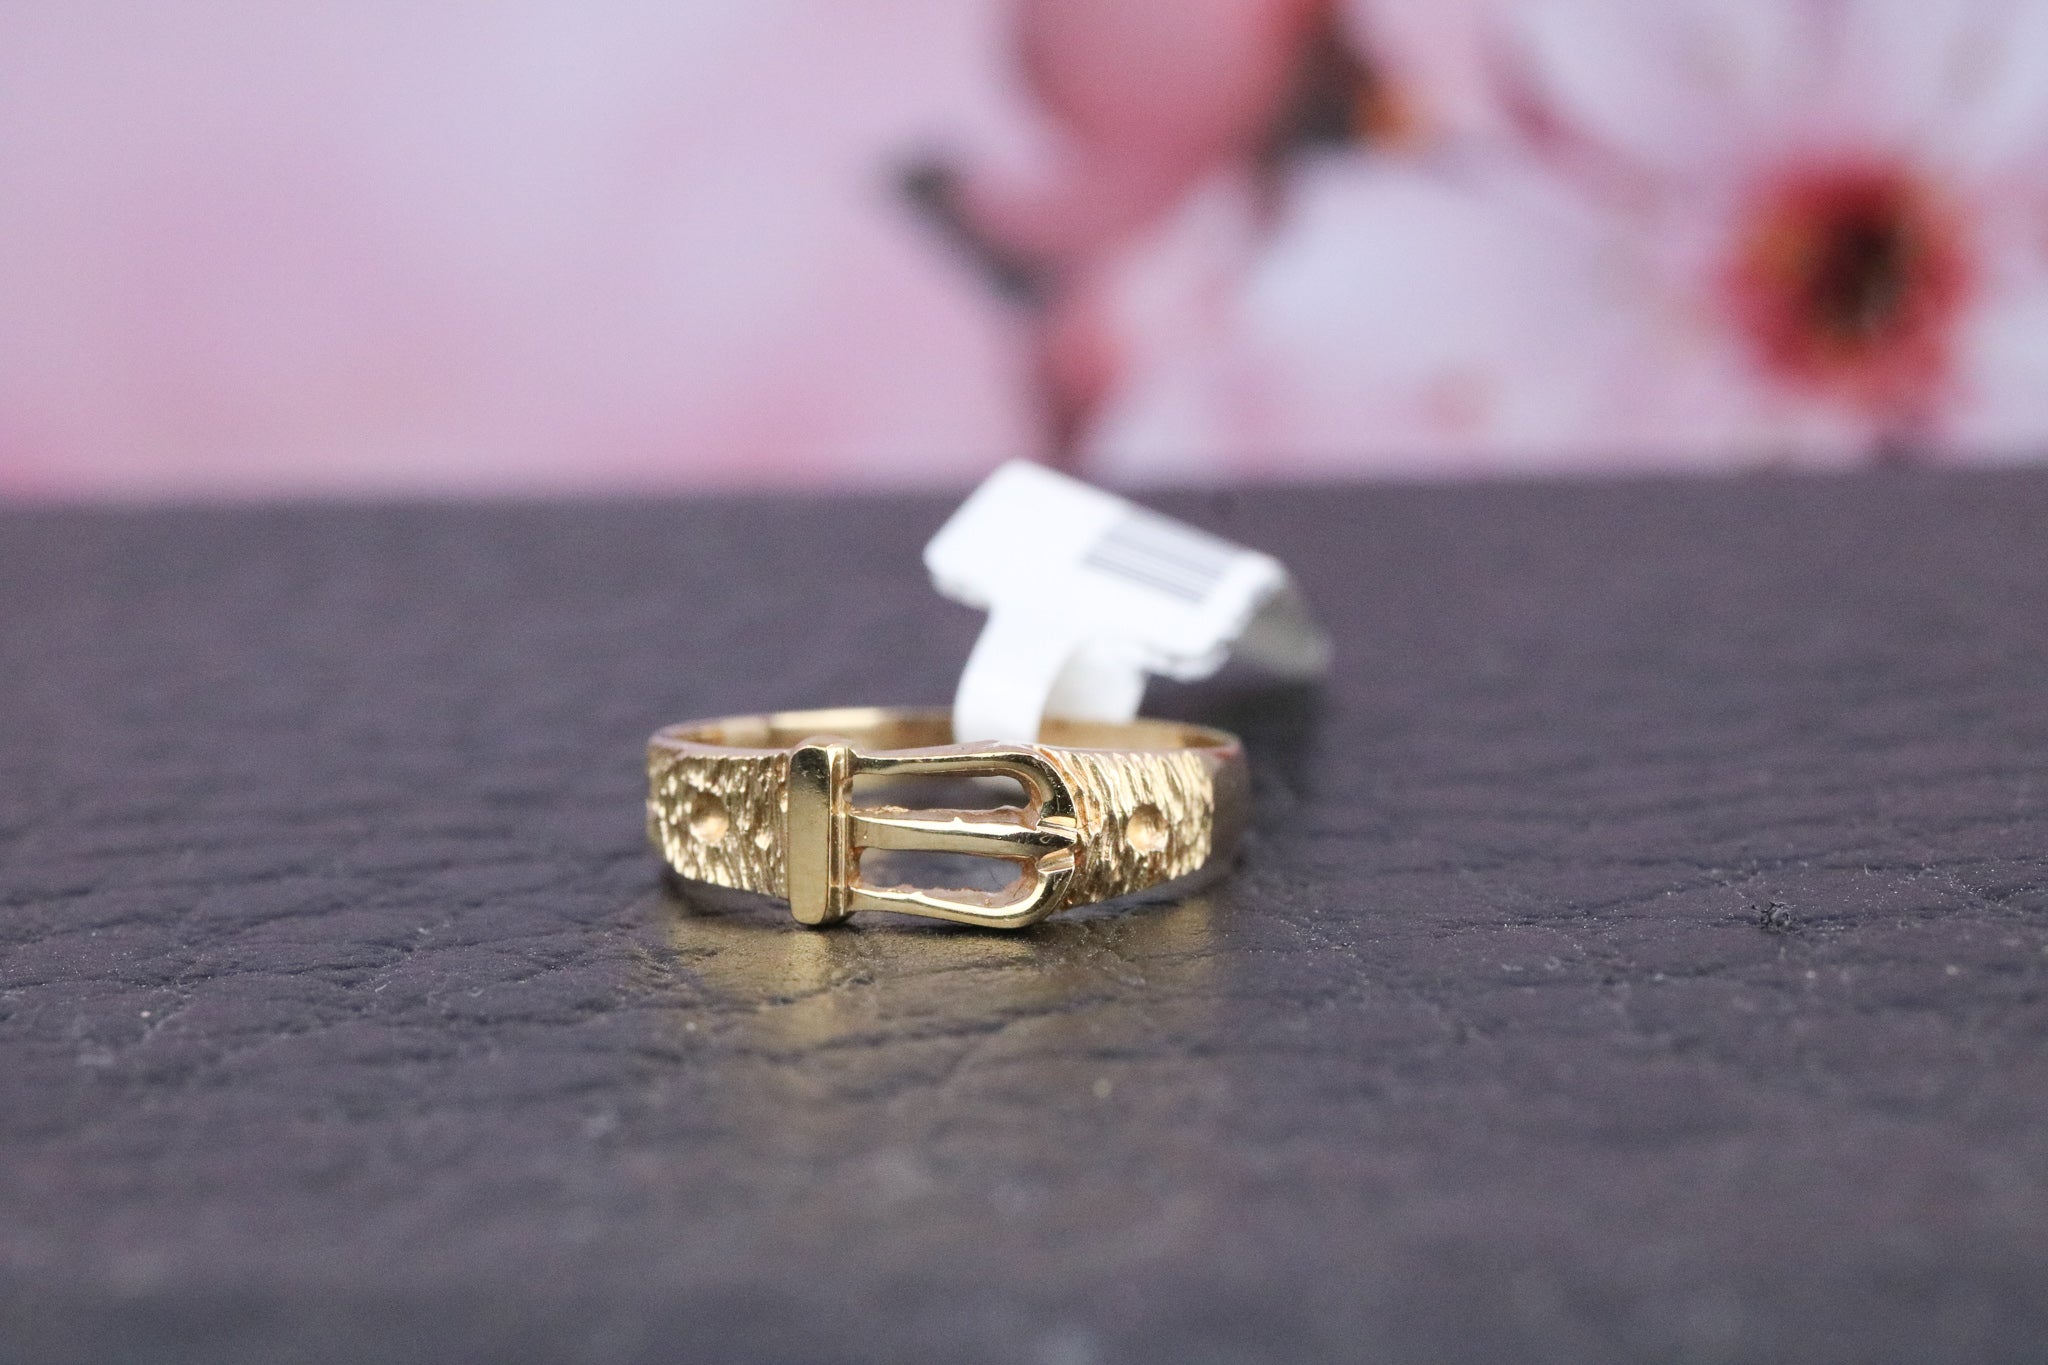 9ct Gold Buckle Ring - CO1377 - Hallmark Jewellers Formby & The Jewellers Bench Widnes